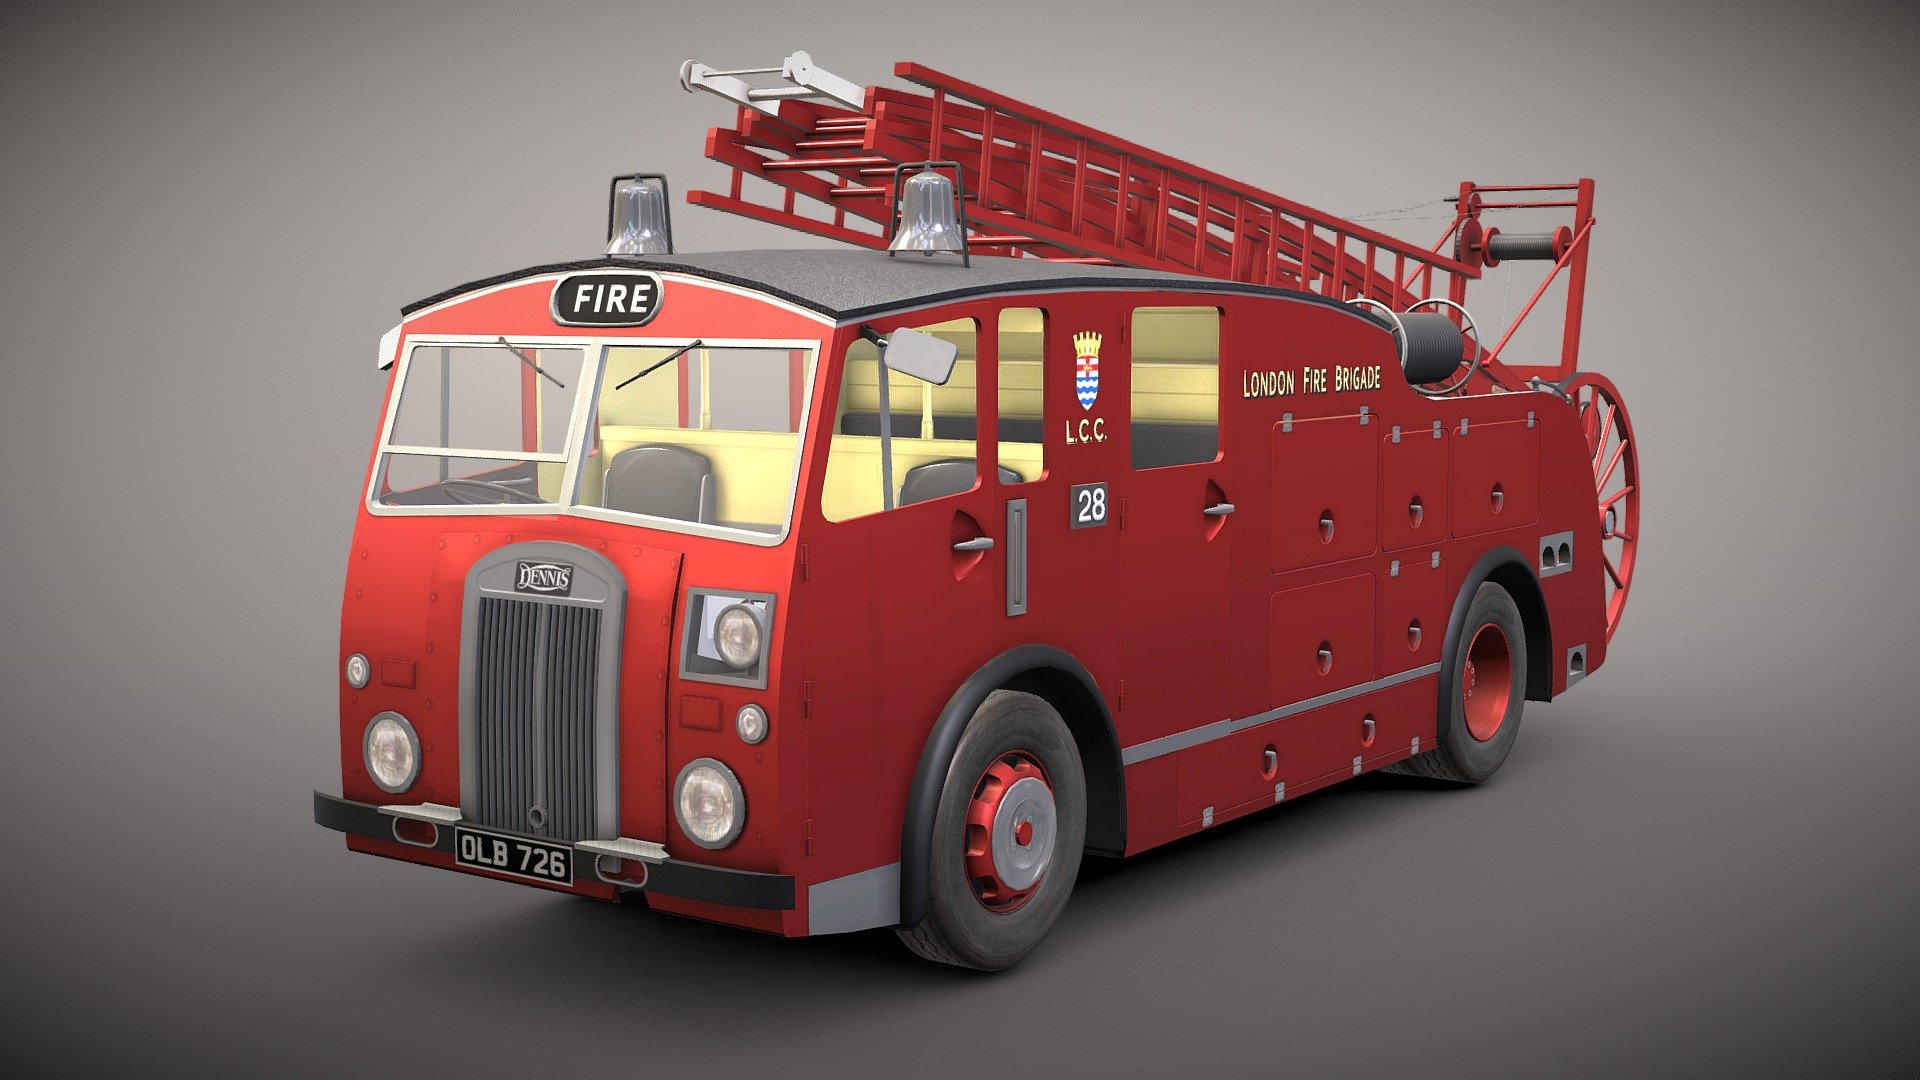 DING DING DING DING&hellip; WHERE'S THE FIRE?!

HAVE NO FEAR! THE FIRE BRIGADE ARE HERE TO SAVE THE DAY IN THEIR DENNIS F12!

Powered by a Rolls-Royce straight-eight 5.7-litre engine, these aluminium bodied on wooden frames pump-escapes are considered to be the first modern postwar appliances by the fire crew!



About this model:

Game-quality, simplified and not 100% accurate compare to it's reallife counterpart, this 3D model is suitable for use in smaller projects or as a background prop.

A Middlesex Fire Brigade version can be found here:
https://sketchfab.com/3d-models/dennis-f12-middlesex-ver-9d9ff8f8199242848c9c6f08502e562d

Please note that the side of the models are mirrored and shared/overlapped UV. So you might consider to look out on these especially if you make custom textures with normal maps.

Turbosquid version can be found here with more variations:
https://www.turbo squid.com/3d-models/3d-model-dennis-f12-fire-engine-2127954 (no space) - Dennis F12 fire engine - London Fire Brigade - Buy Royalty Free 3D model by YanPictures (@jlee21) 3d model